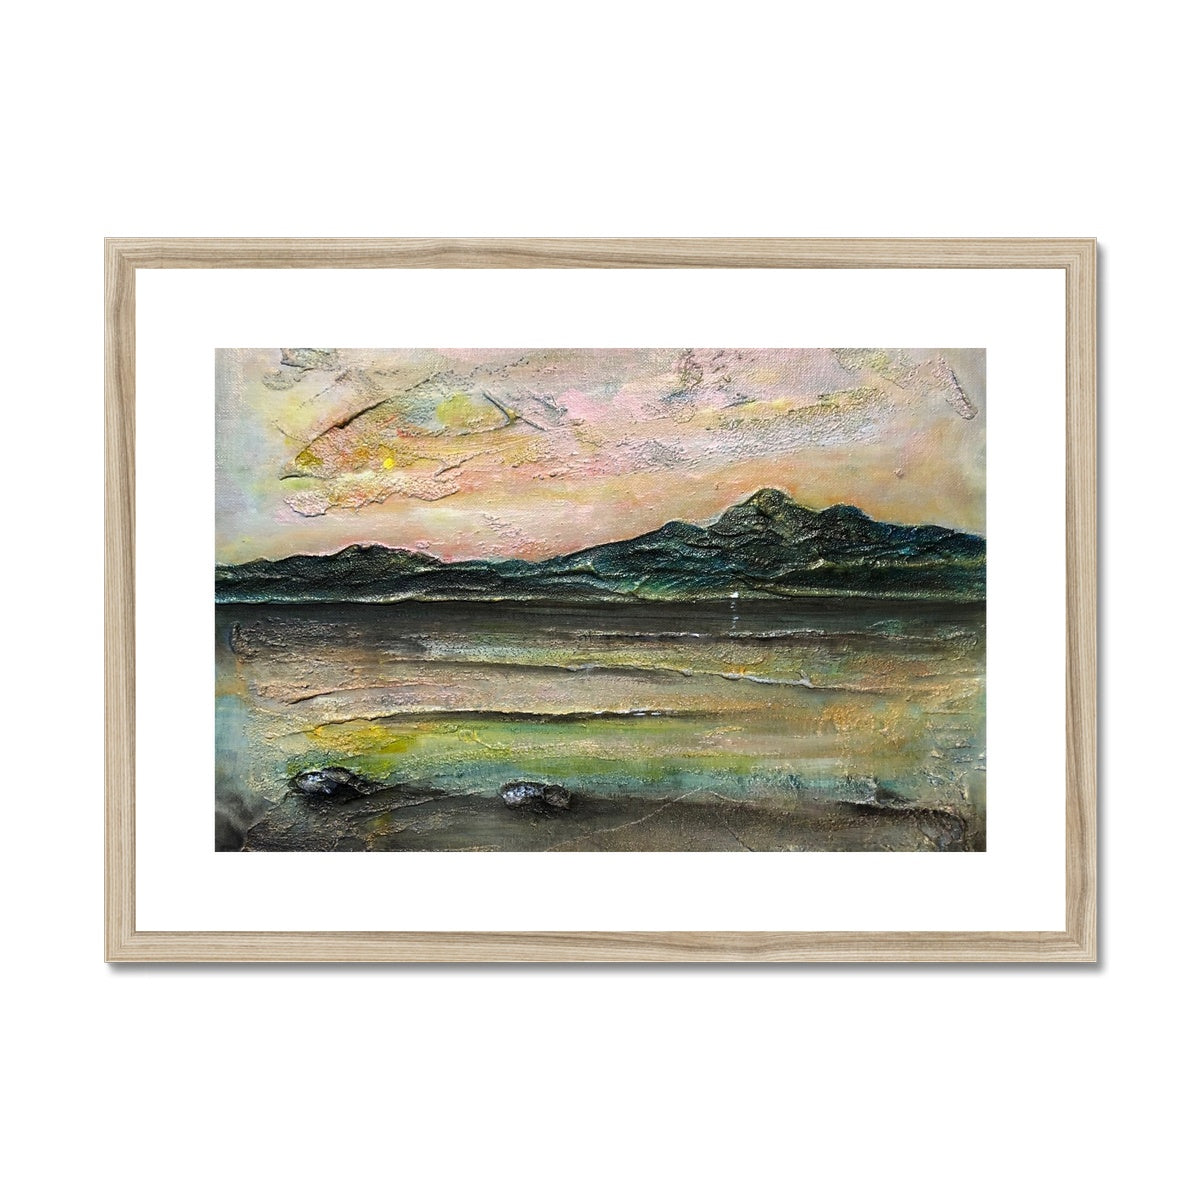 An Ethereal Loch Na Dal Skye Painting | Framed & Mounted Prints From Scotland-Framed & Mounted Prints-Scottish Lochs & Mountains Art Gallery-A2 Landscape-Natural Frame-Paintings, Prints, Homeware, Art Gifts From Scotland By Scottish Artist Kevin Hunter